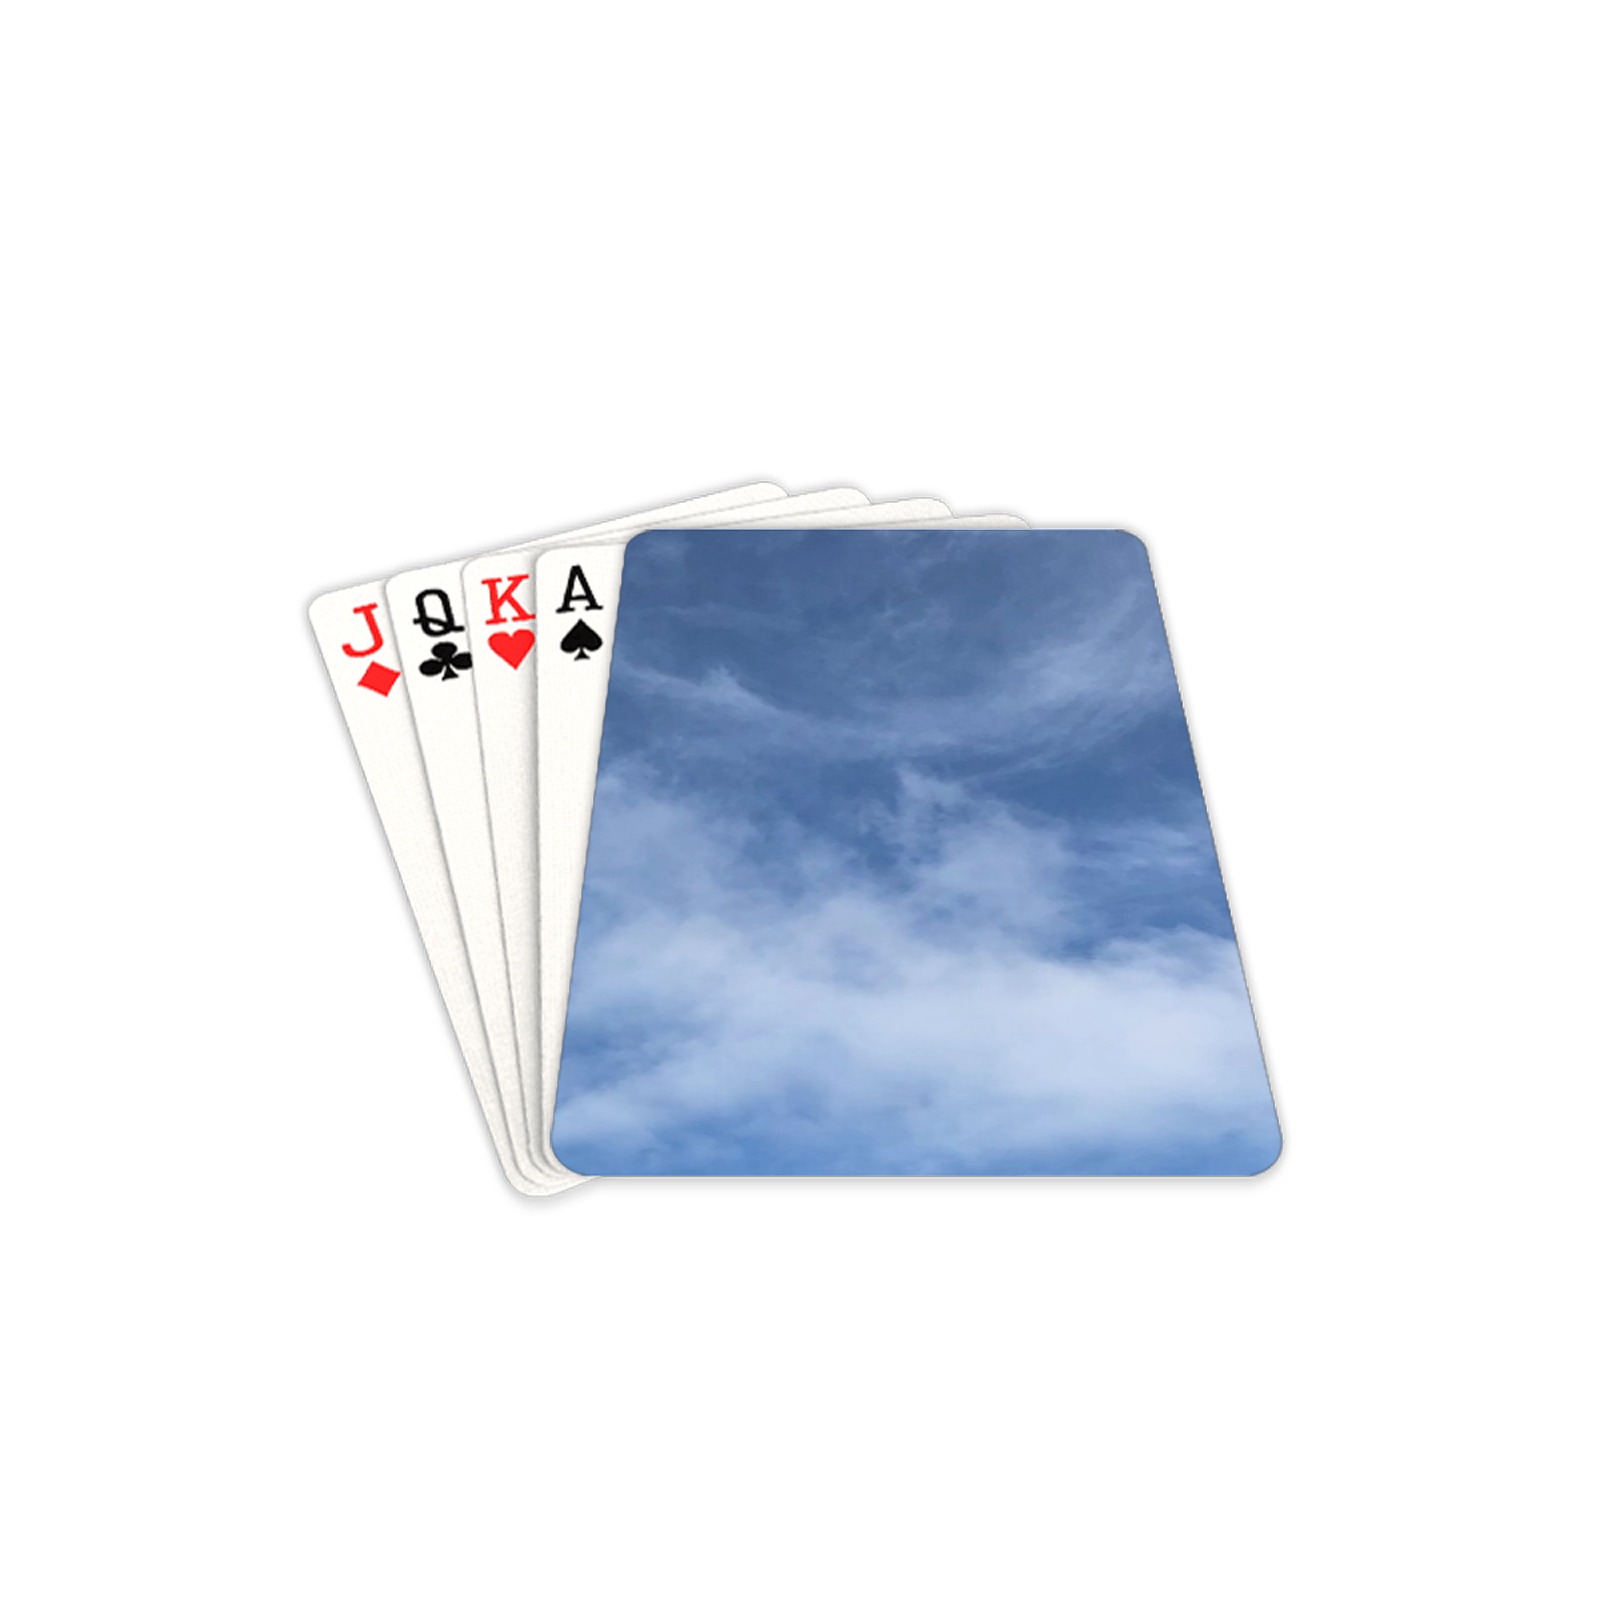 Sky Wishes Playing Cards 2.5"x3.5"